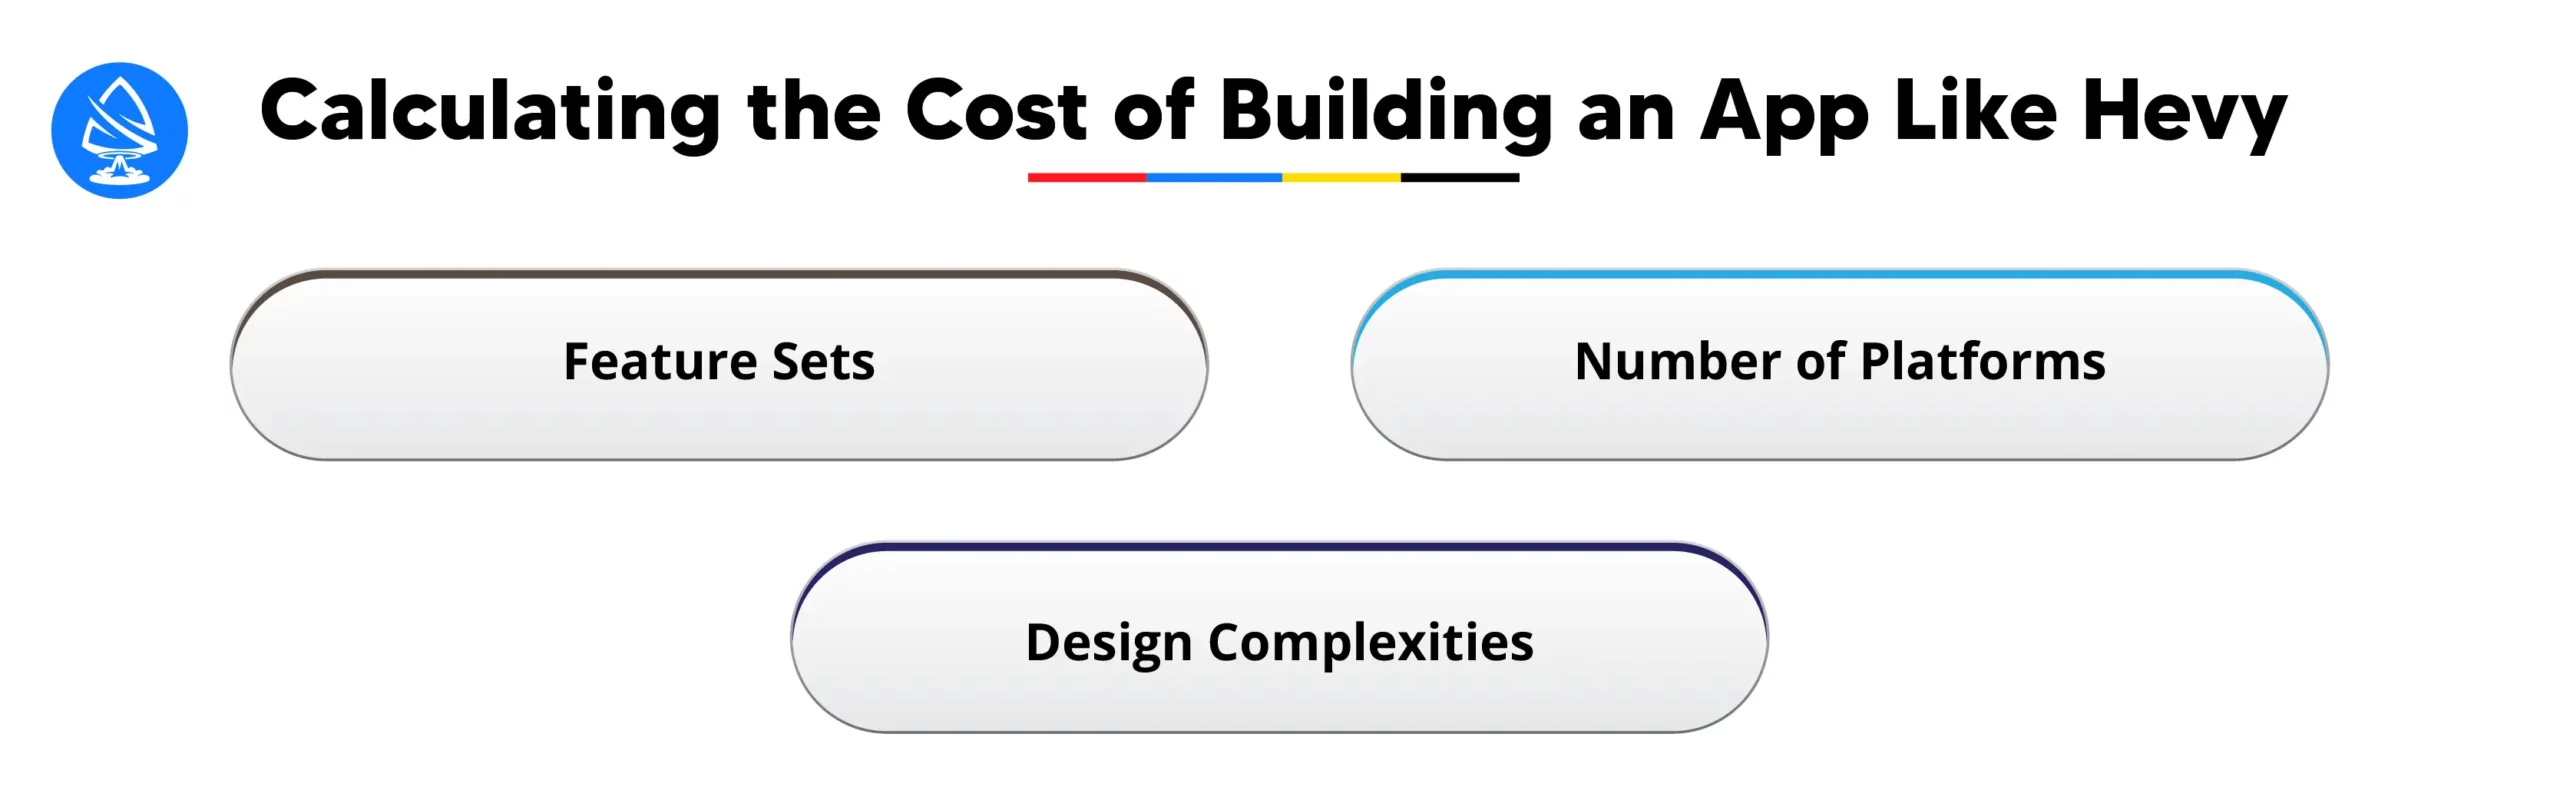 Calculating the Cost of Building an App Like Hevy